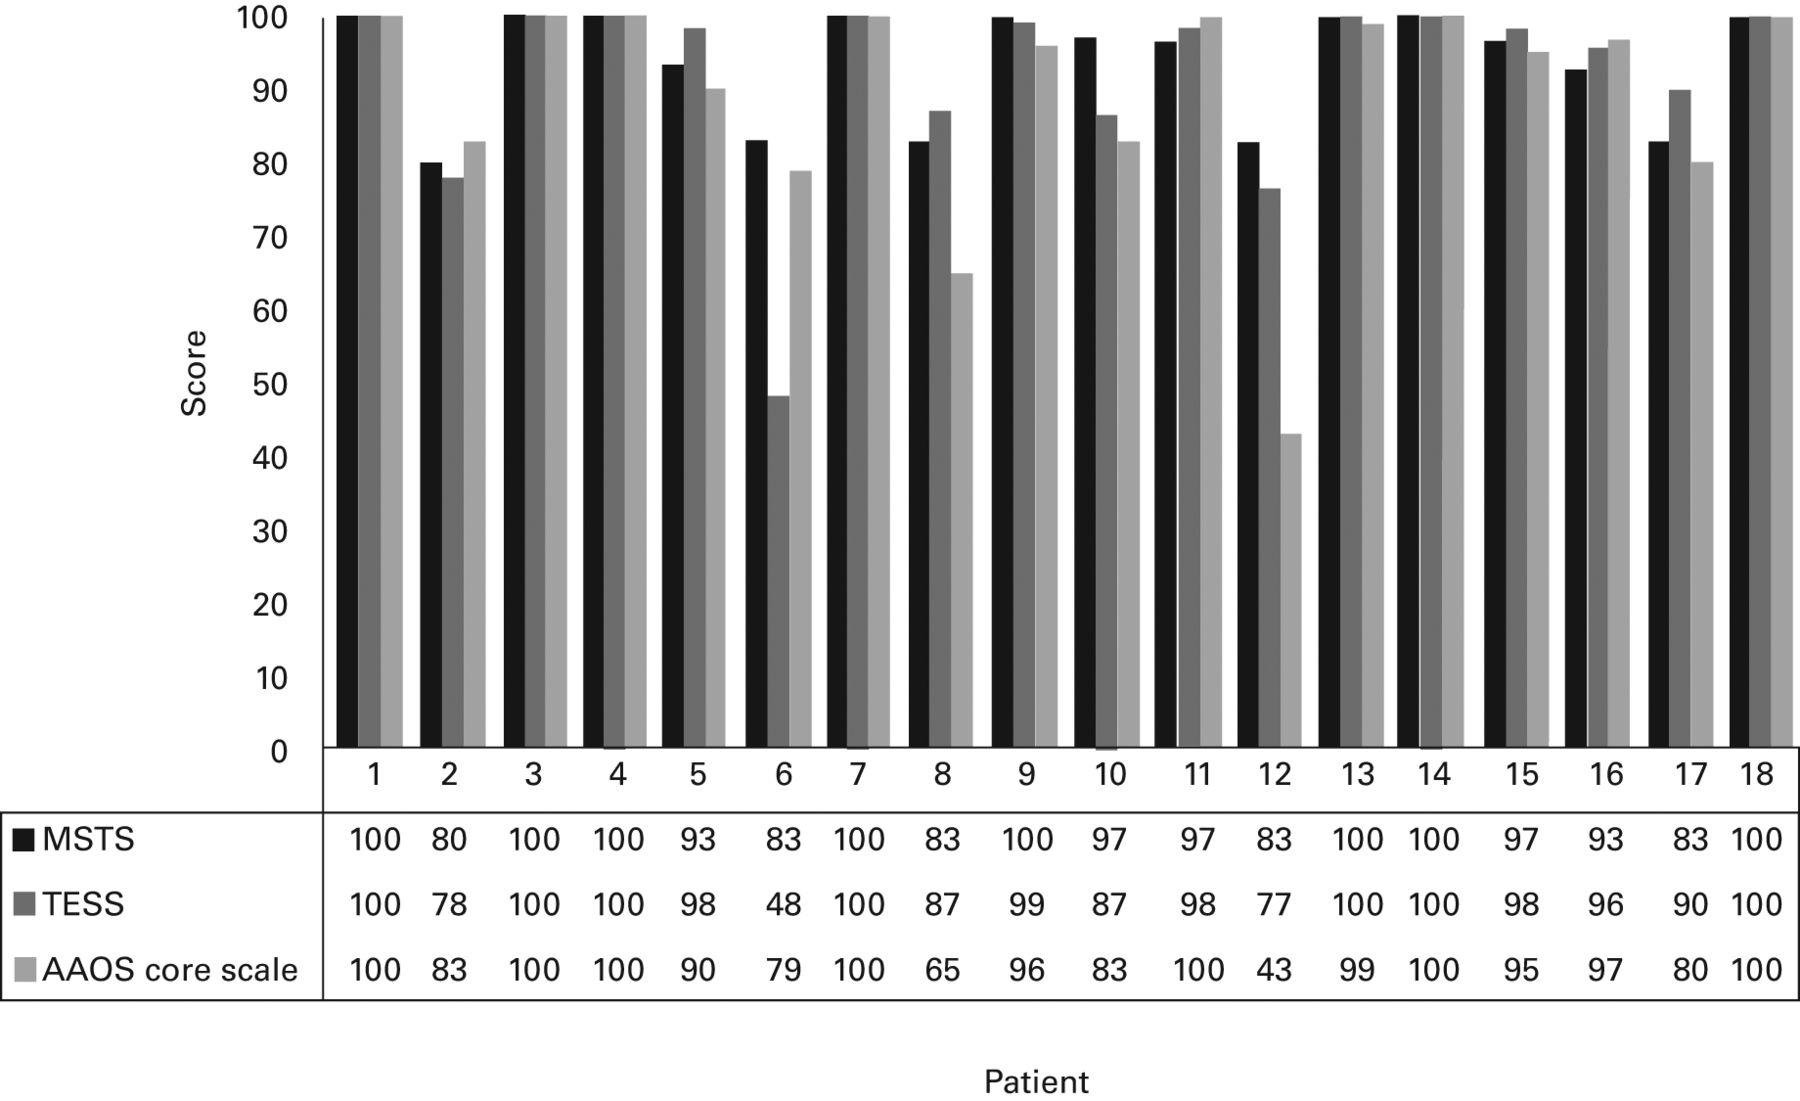 Fig. 3 
            Bar charts showing the Musculoskeletal
Tumor Society (MSTS) score, Toronto Extremity Salvage score (TESS) and
American Academy of Orthopaedic Surgeons (AAOS) foot and ankle scores
for all 18 patients. Non-operatively managed patients are in columns
1 to 4, the patient with residual disease in column 5, and the patients
treated surgically in columns 6 to 18.
          